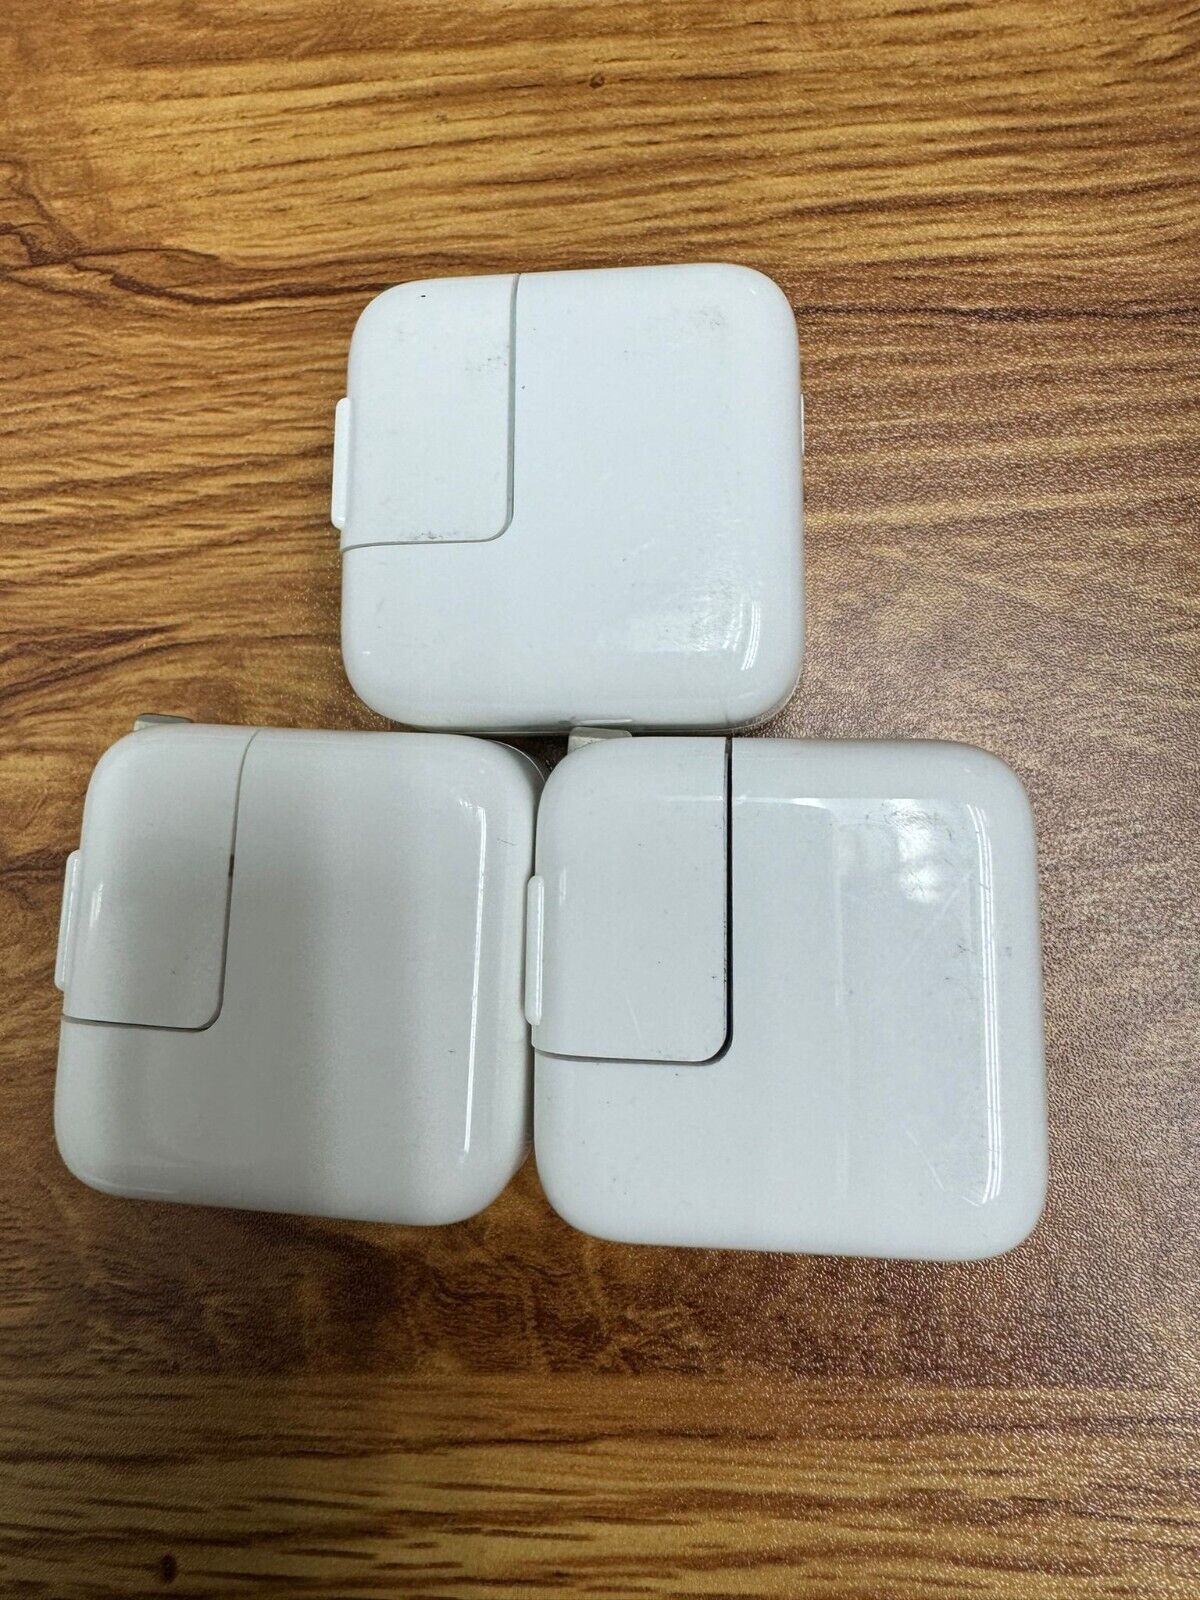 3 PACK Original Apple 10w USB Wall Charger Adapter OEM x3 charging cubes